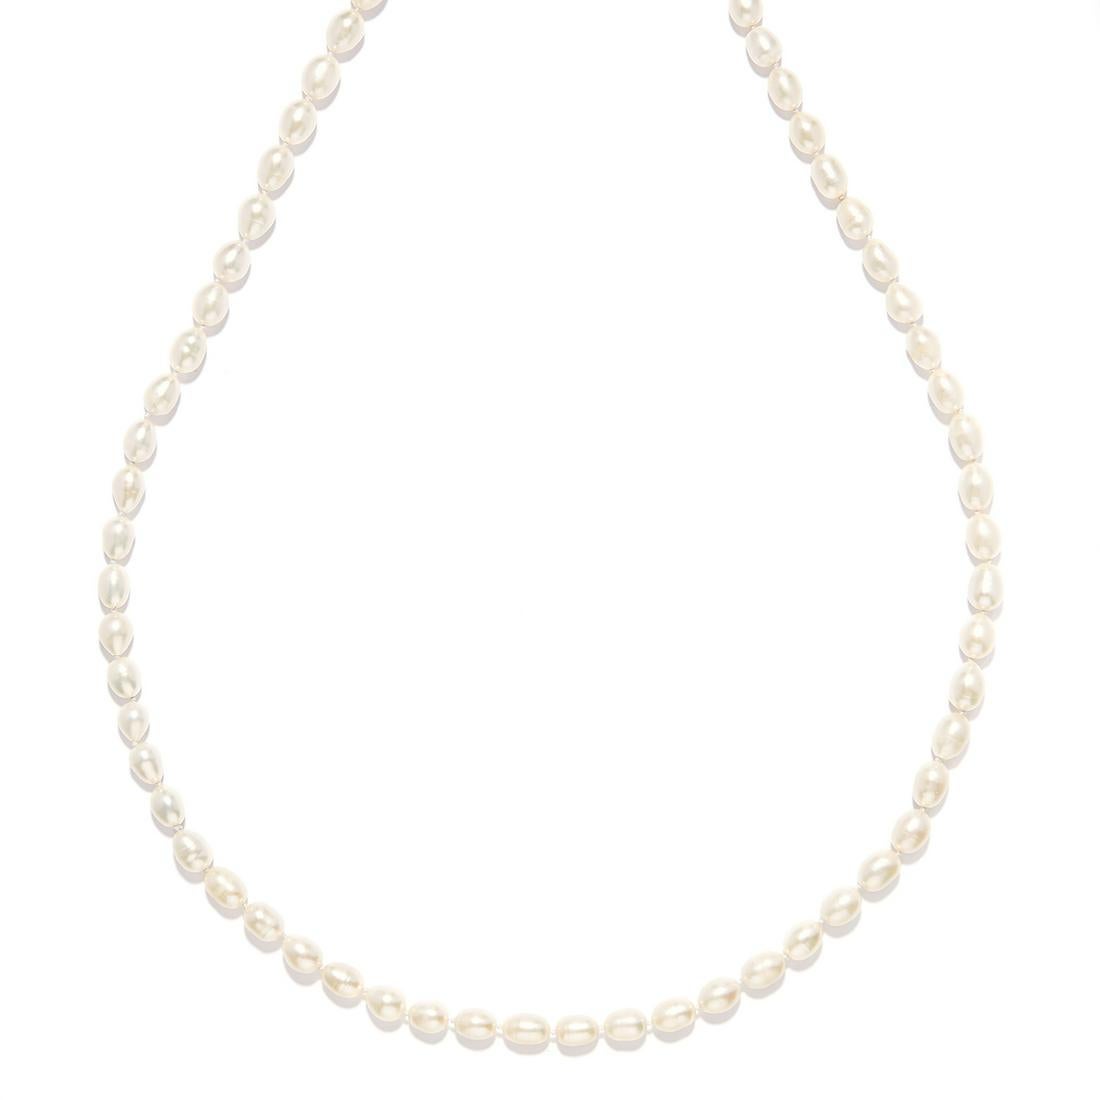 A PEARL ROPE NECKLACE comprising of a single row of pearl beads, 120cm, 78.6g.